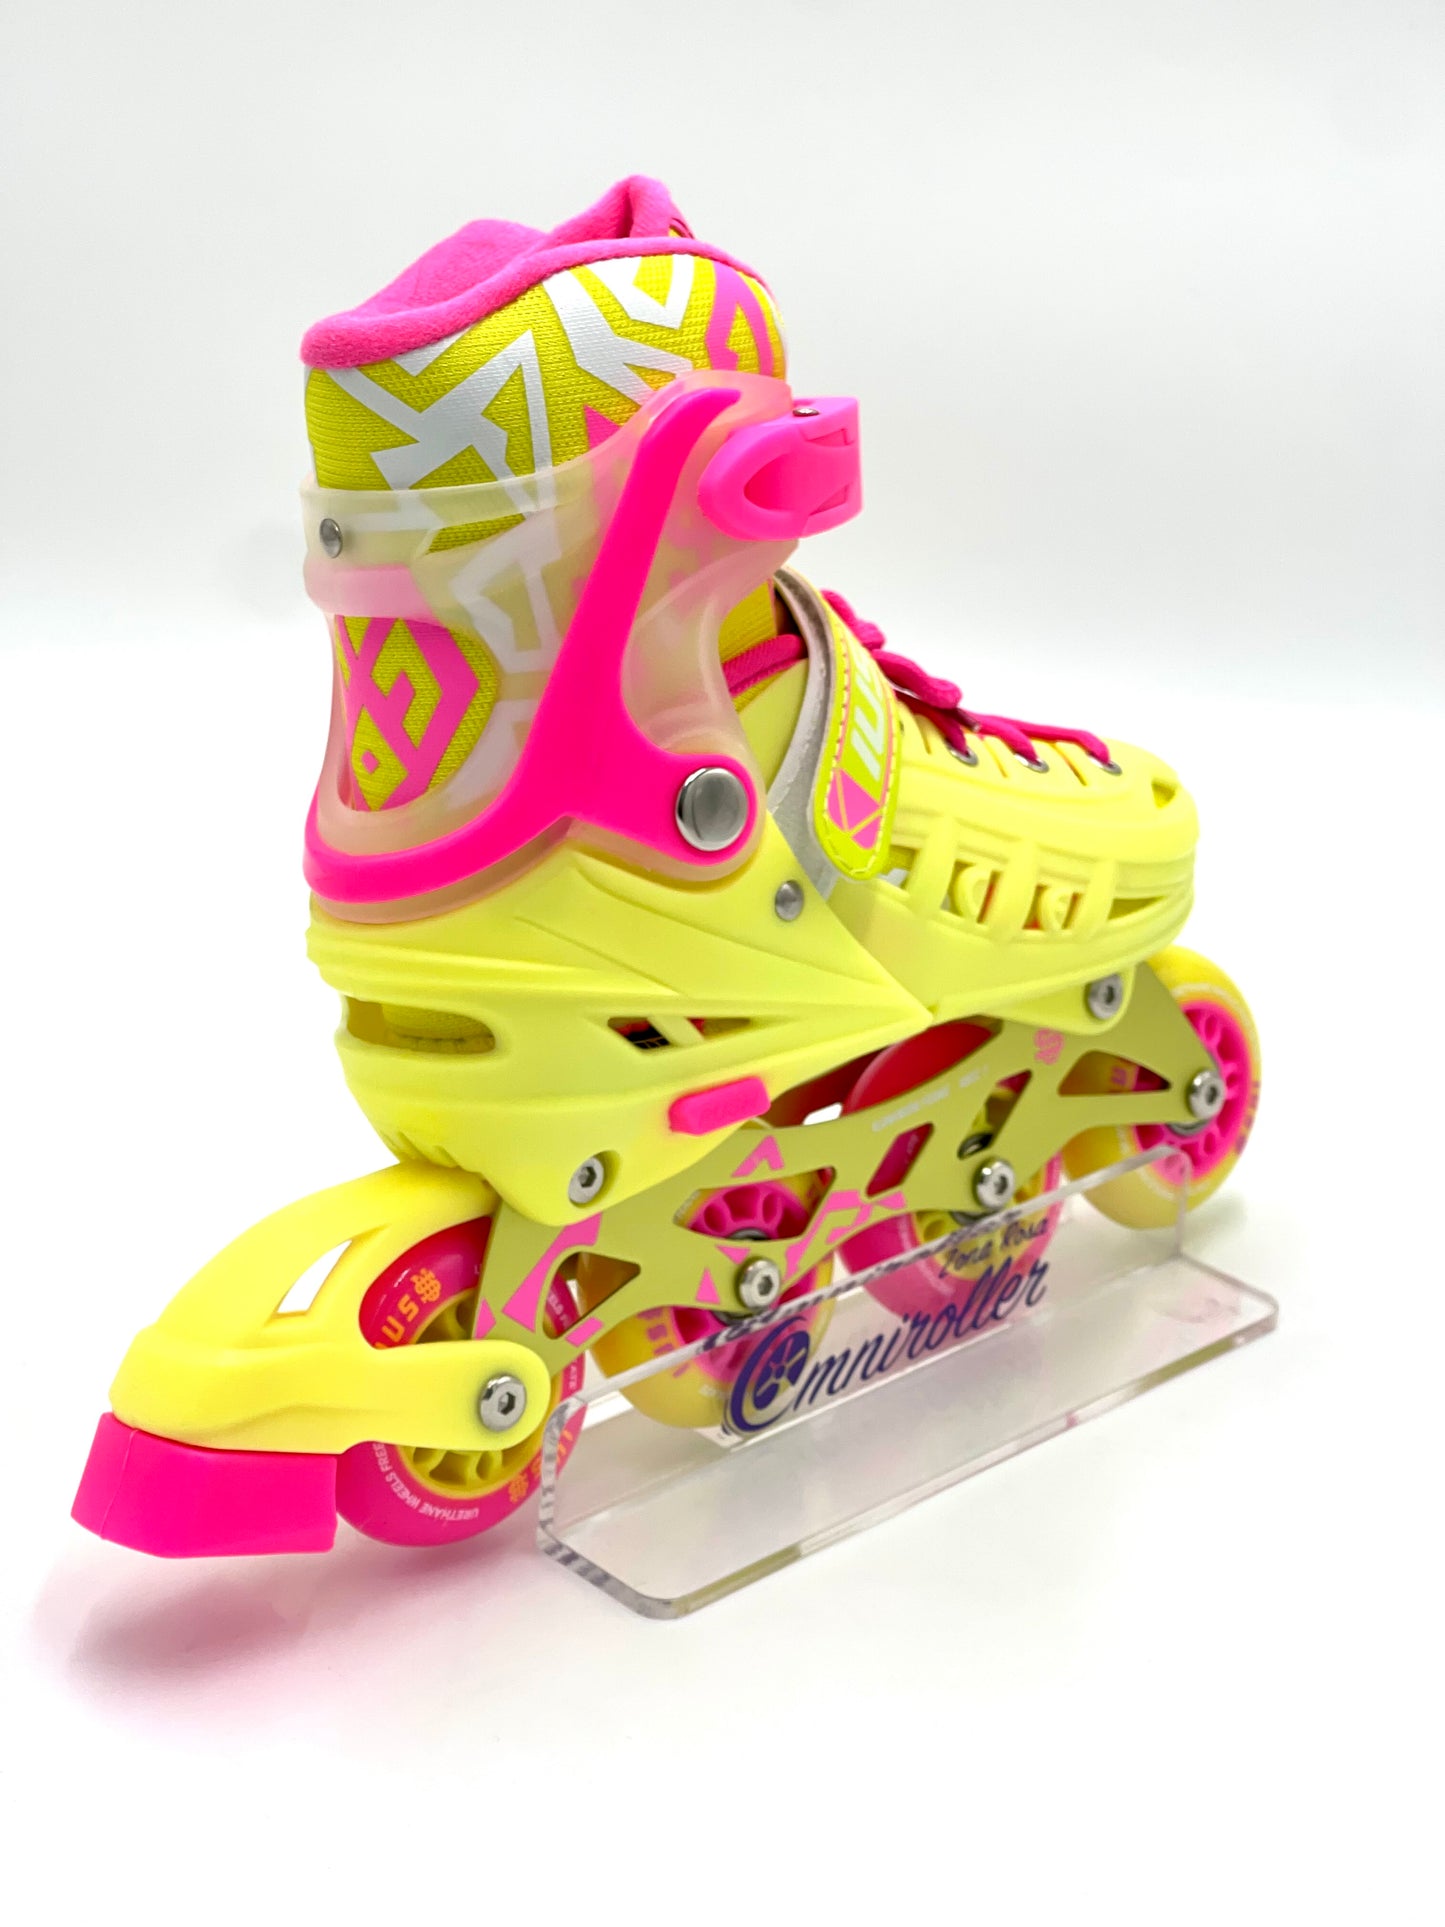 Adjustable Fitness Skates Kit with IUS Protections Pink Yellow